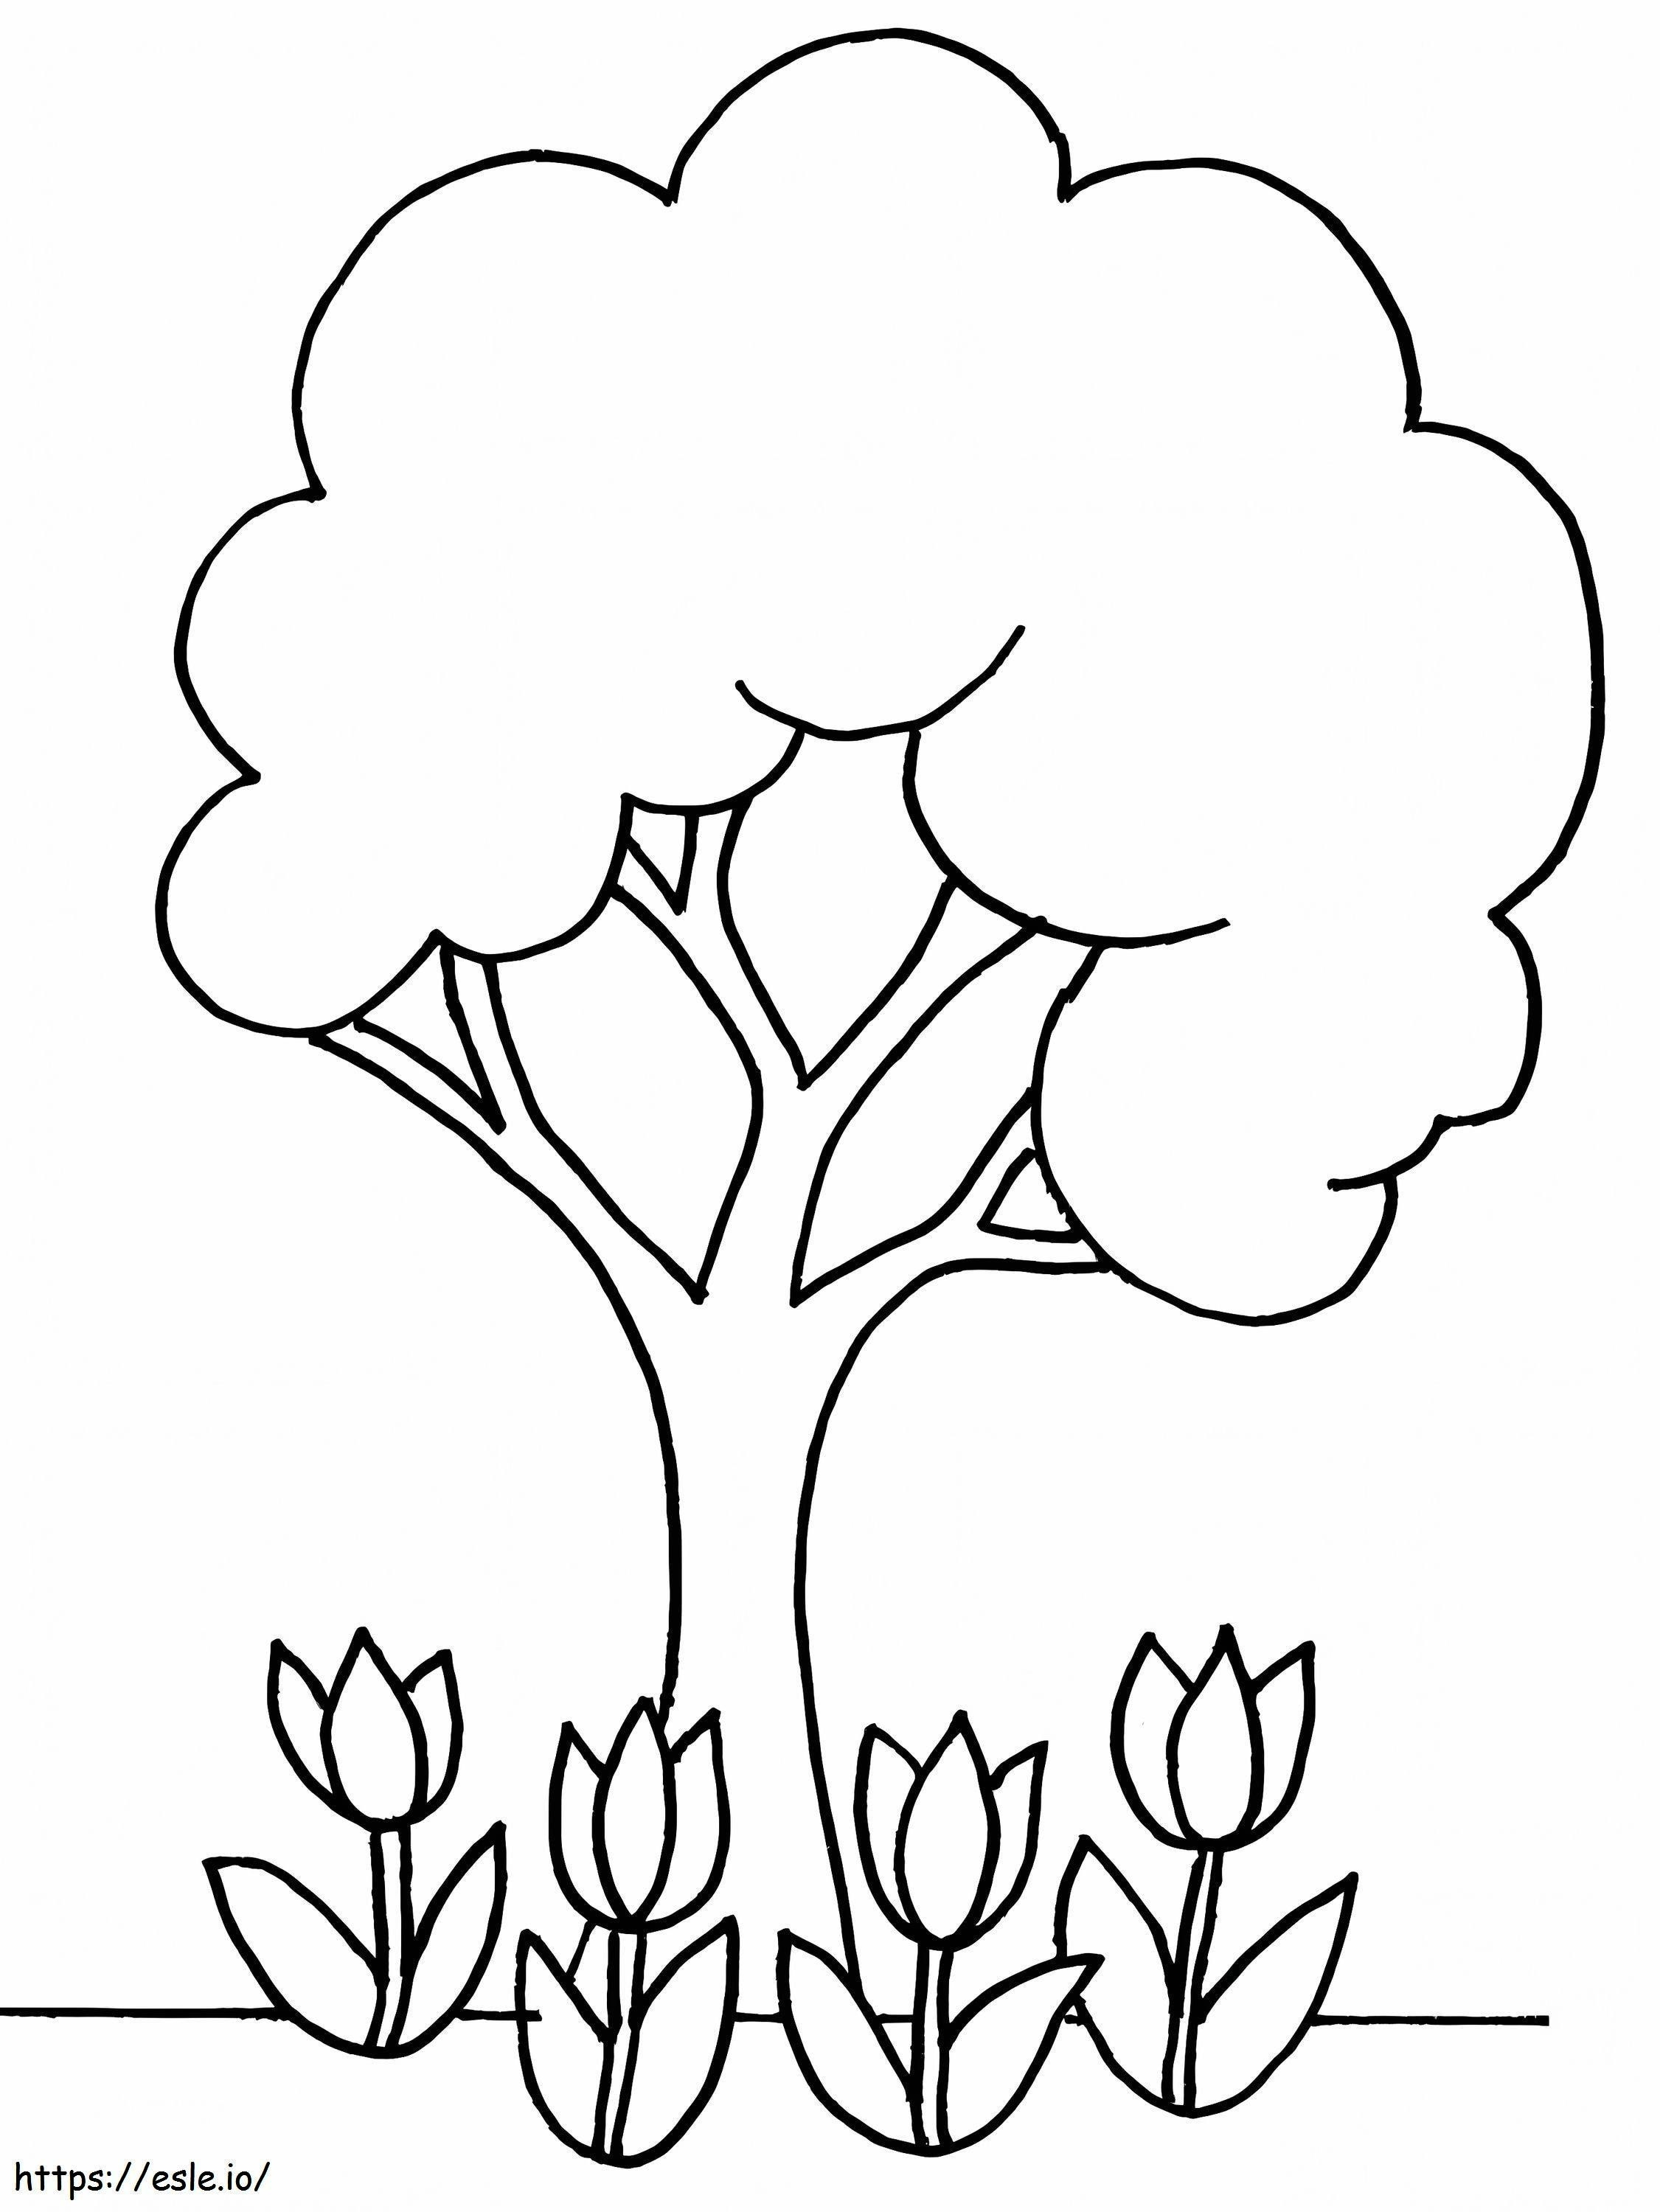 Tree And Flowers In Spring coloring page